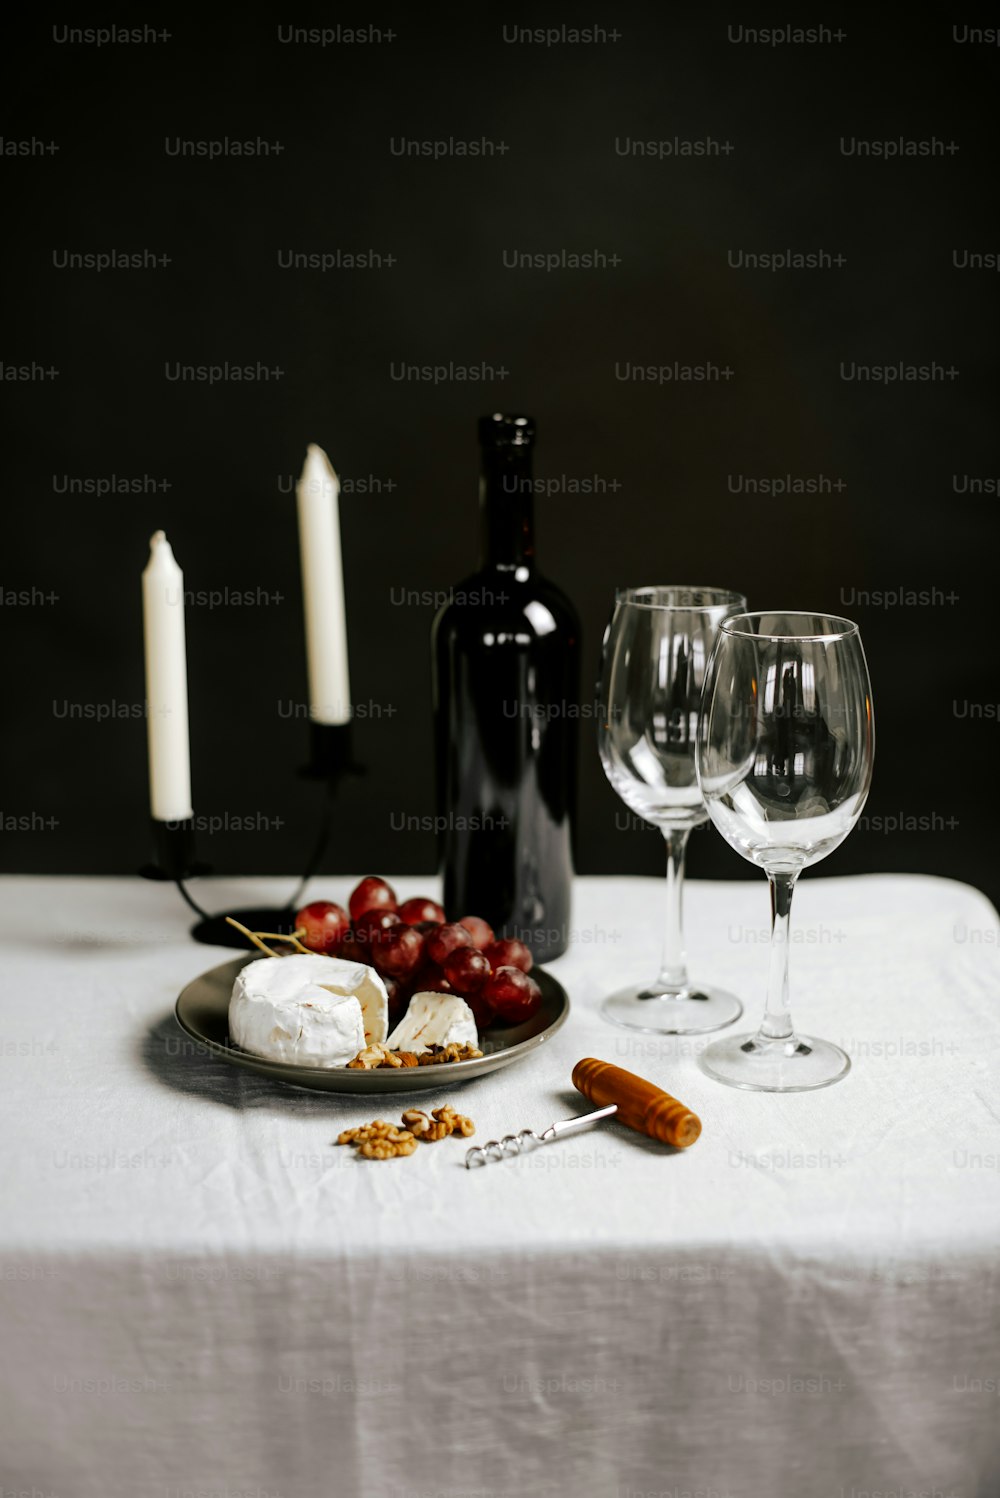 a table topped with a plate of food and two wine glasses